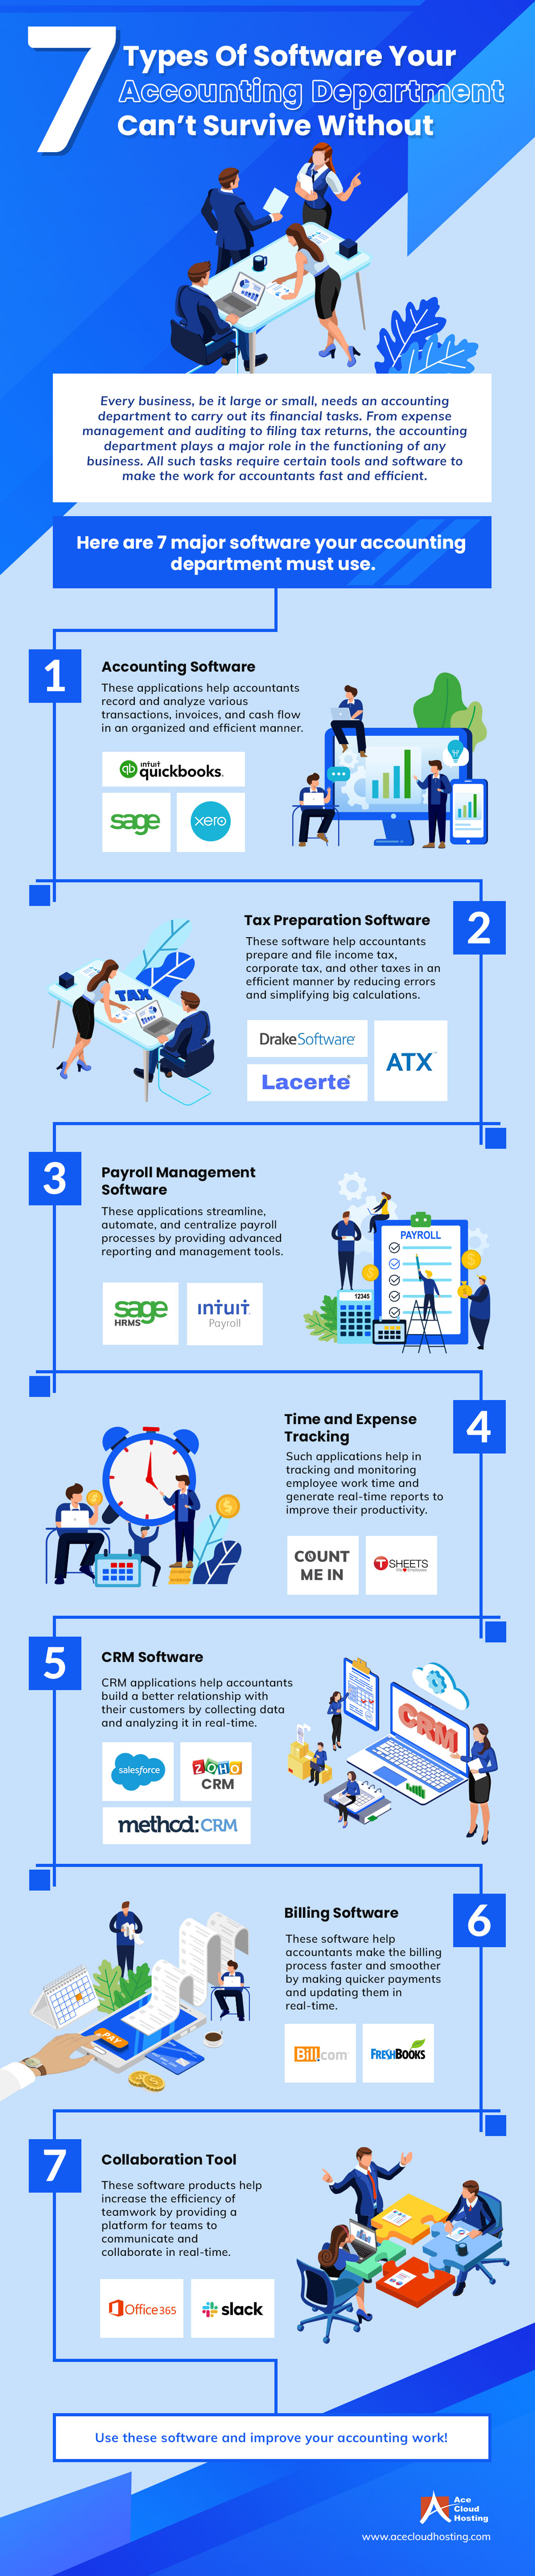 7 Types Of Software Your Accounting Department Can’t Survive Without [Infographic]